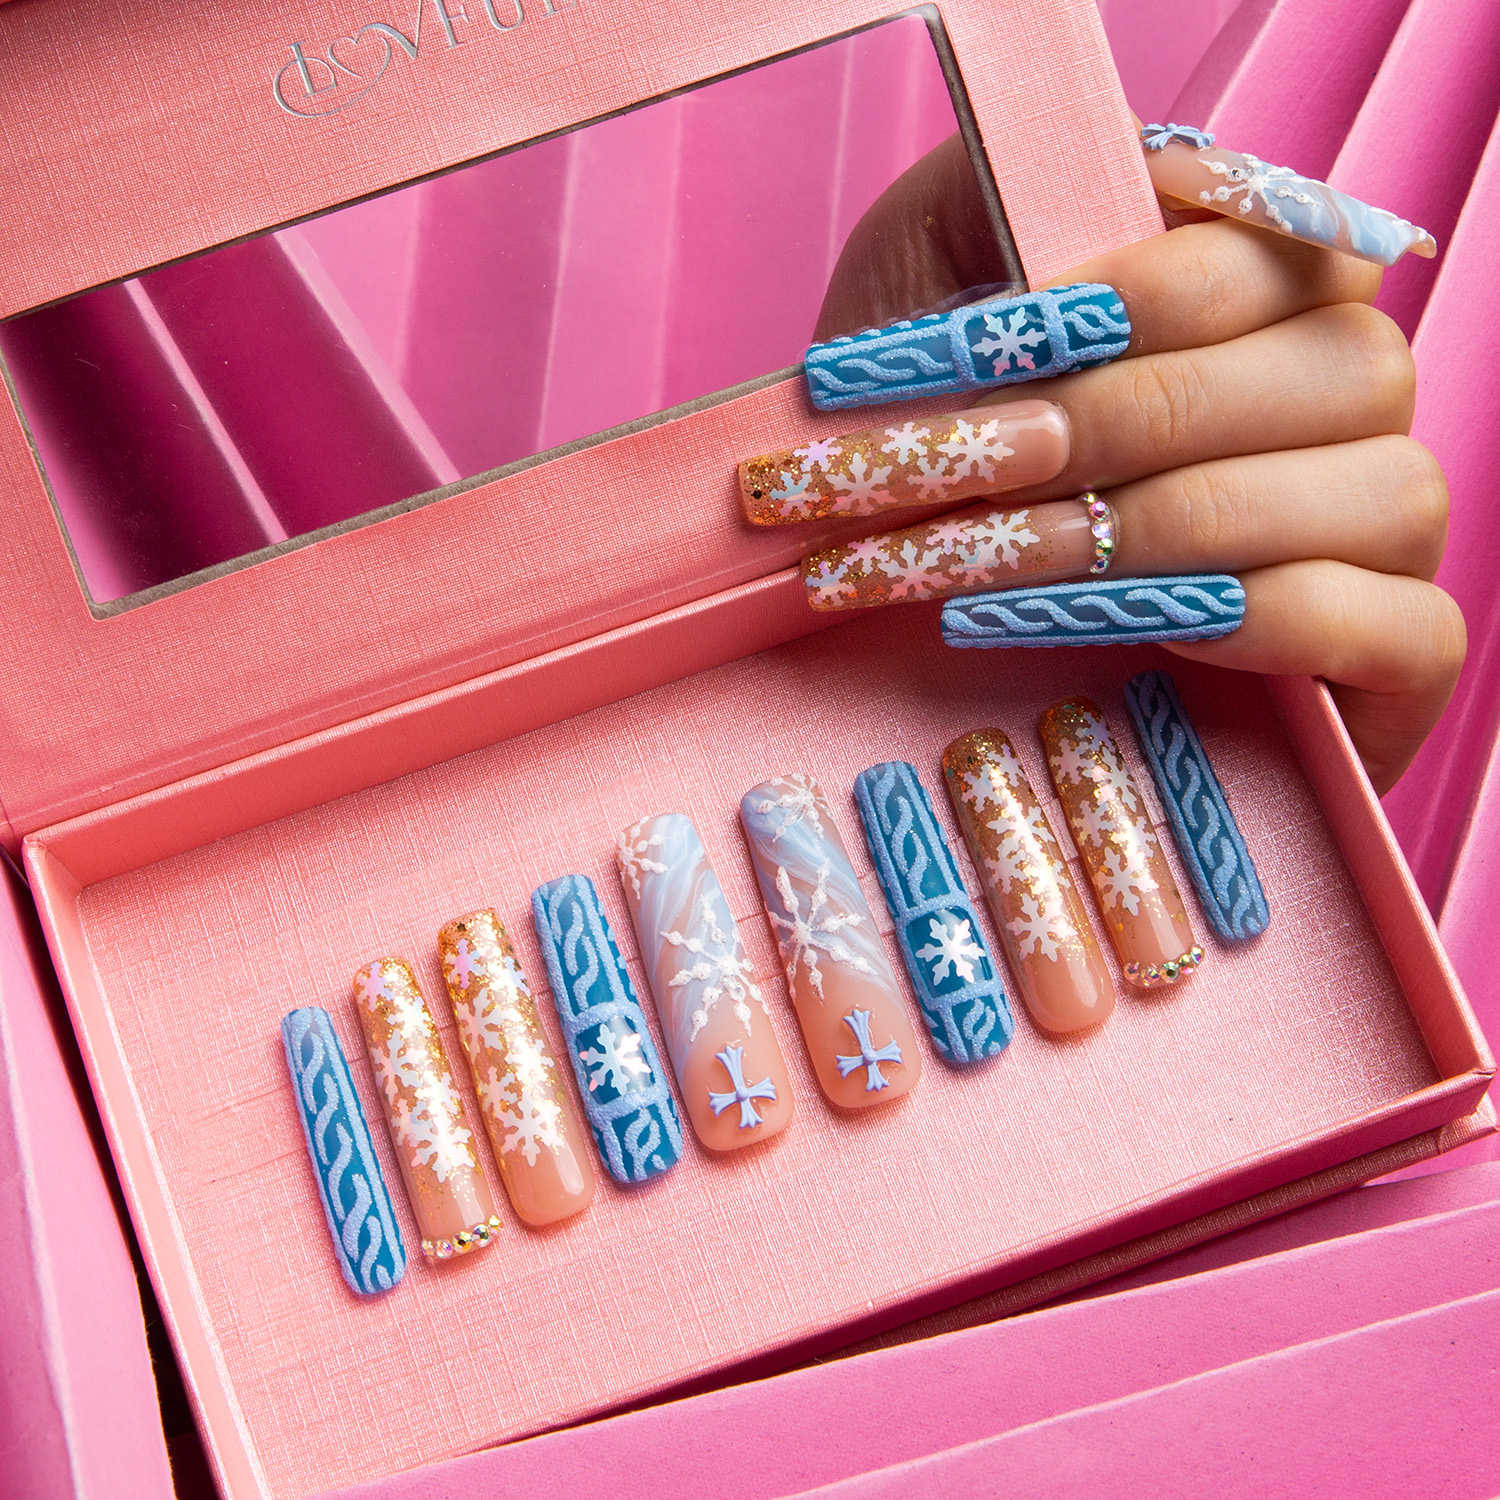 Winter Sunshine press-on nails with blue, gold glitter, and white snowflake designs in a pink box with a mirror lid, held by a hand with matching nails.